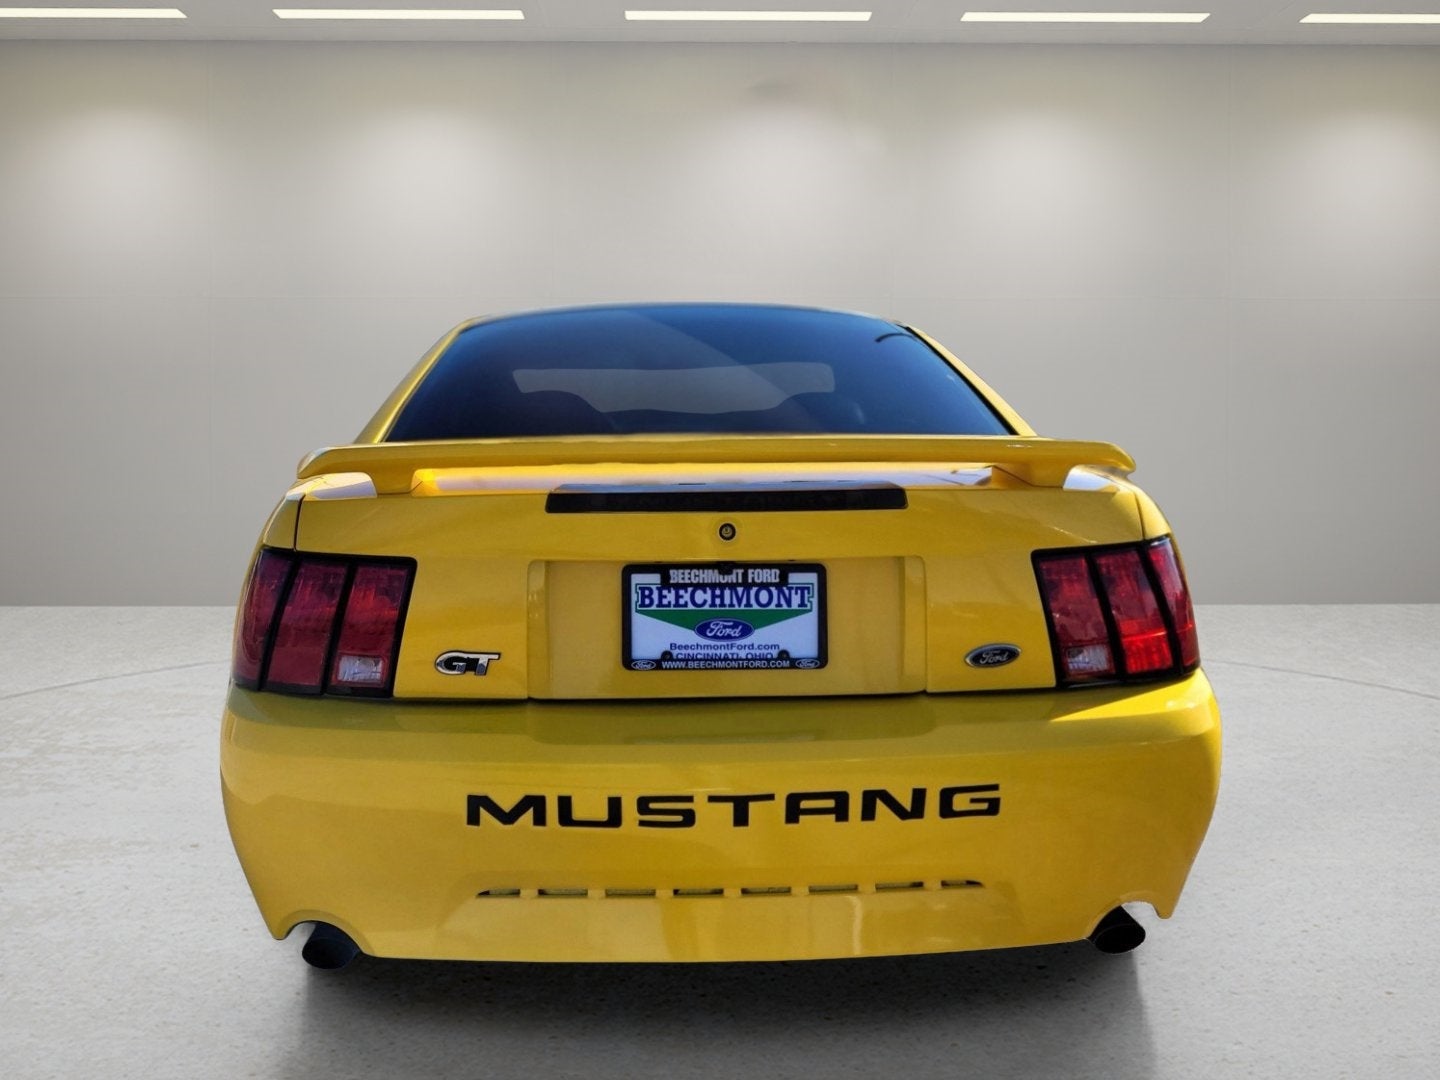 2004 Ford Mustang GT Deluxe